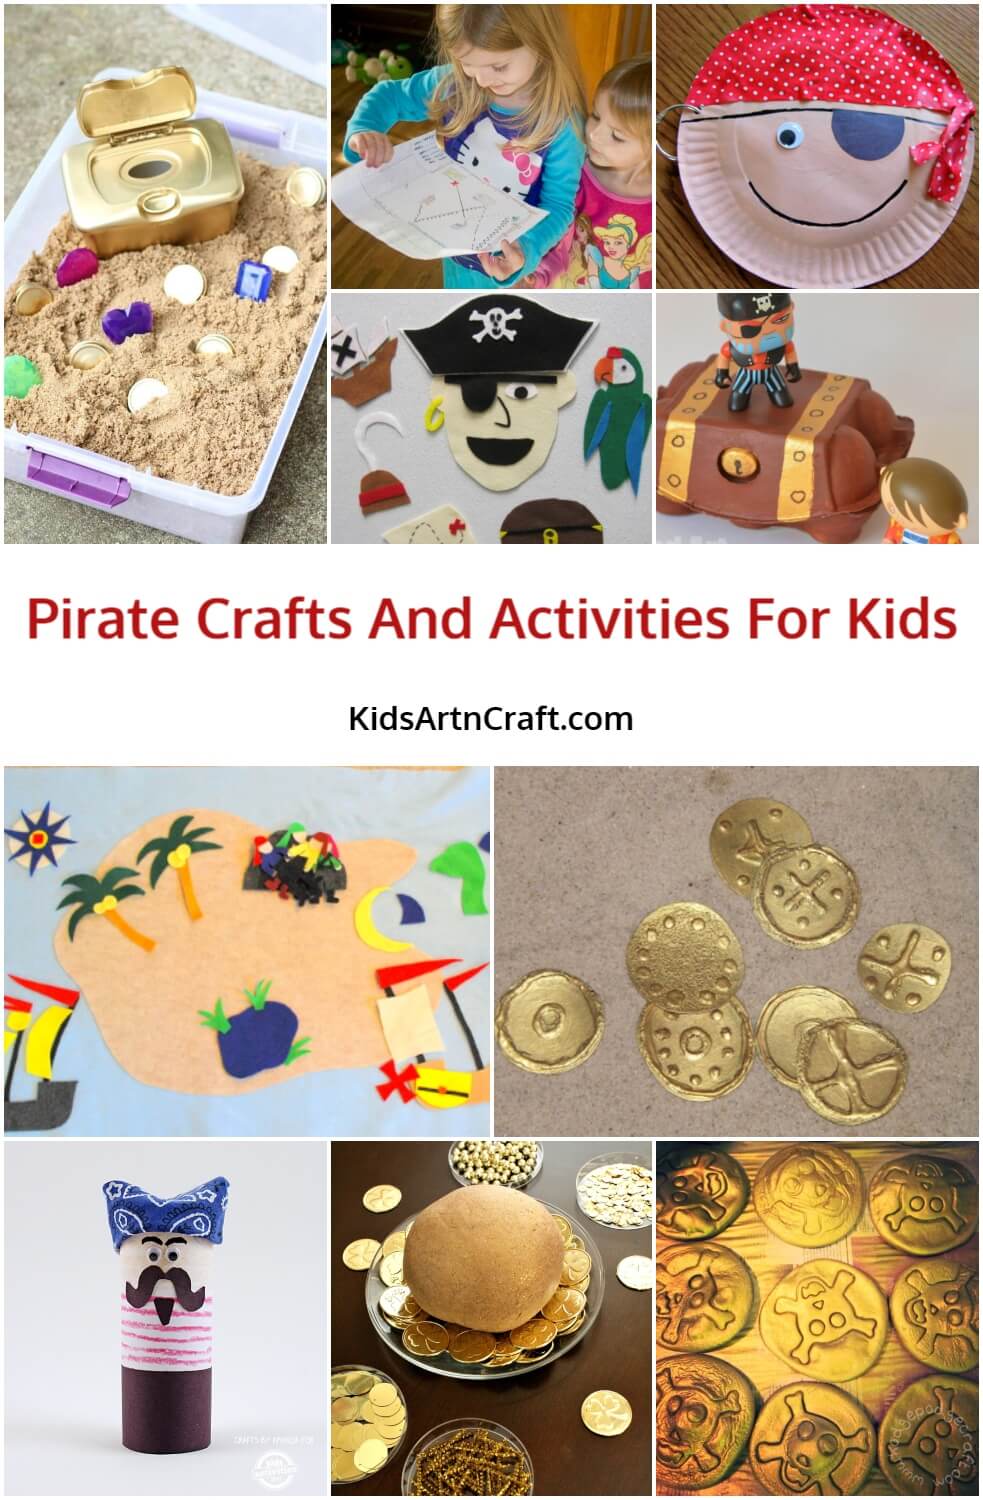 Pirate Crafts And Activities For Kids